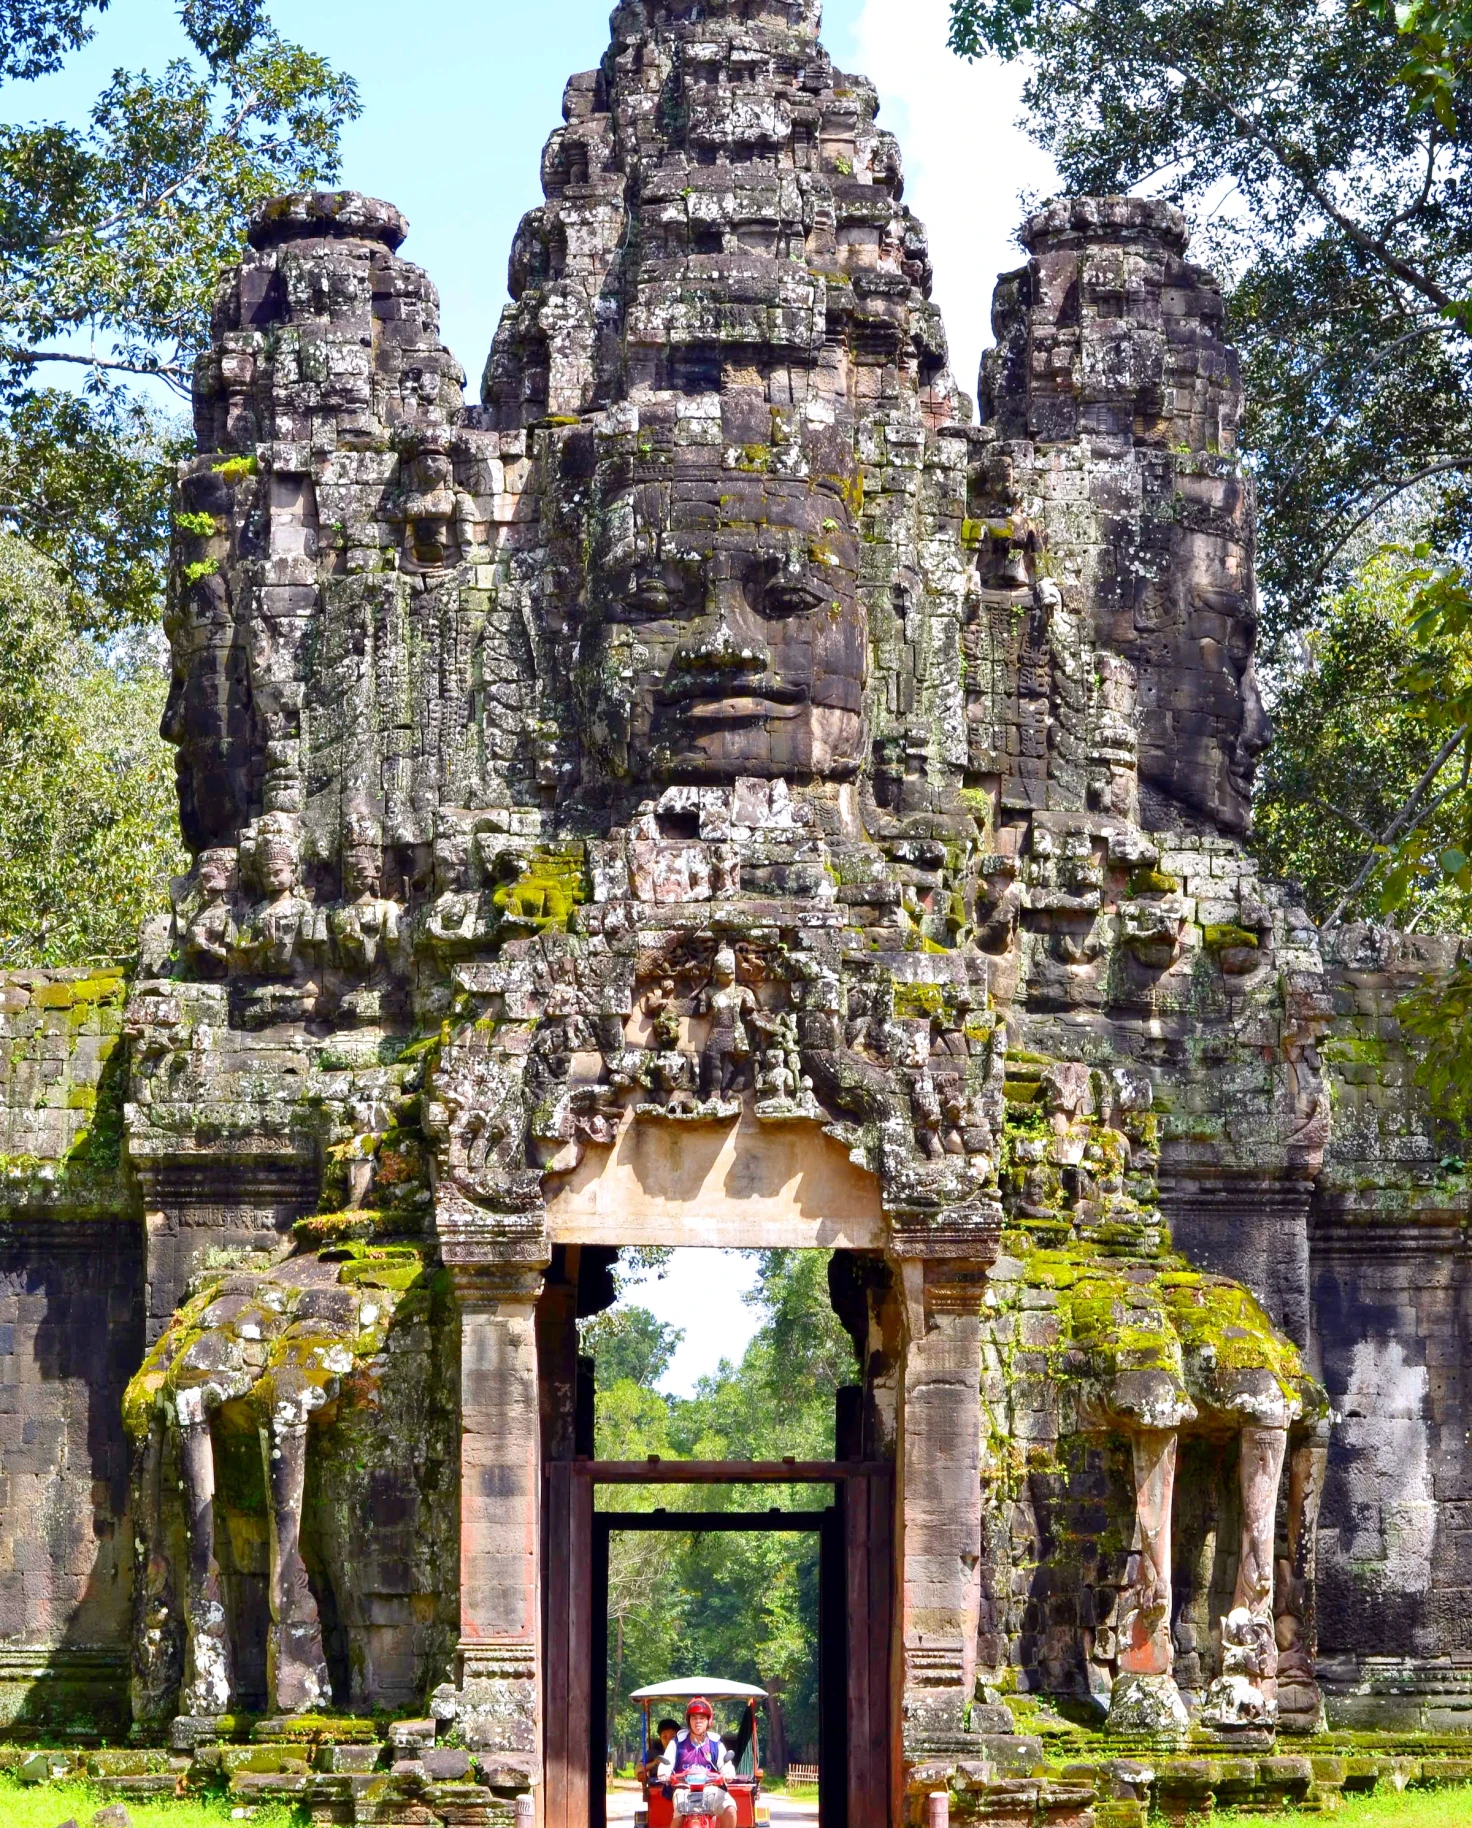  Angkor Wat is an enormous Buddhist temple complex located in northern Cambodia.